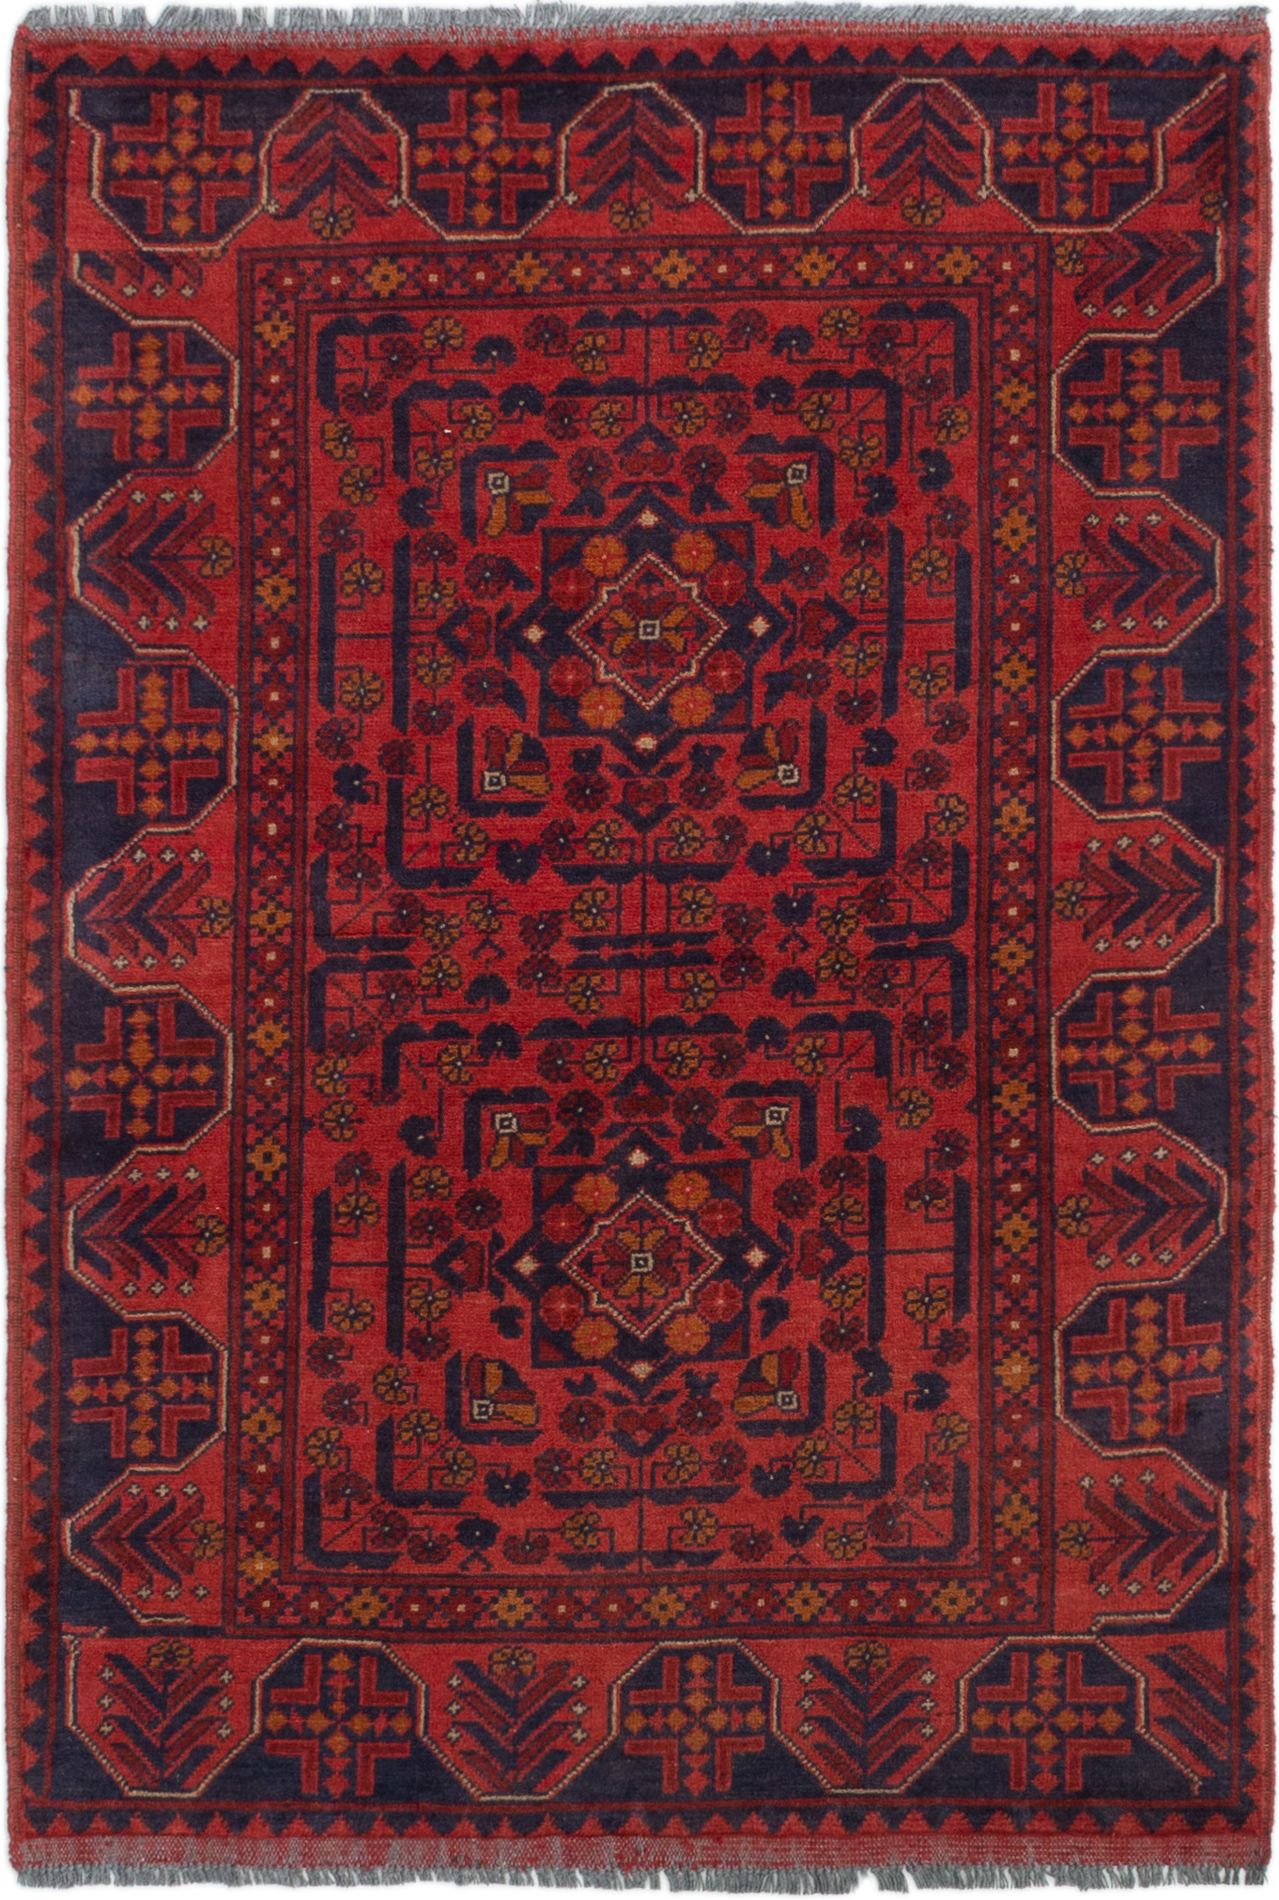 Hand-knotted Finest Khal Mohammadi Red Wool Rug 3'3" x 4'9" (23) Size: 3'3" x 4'9"  